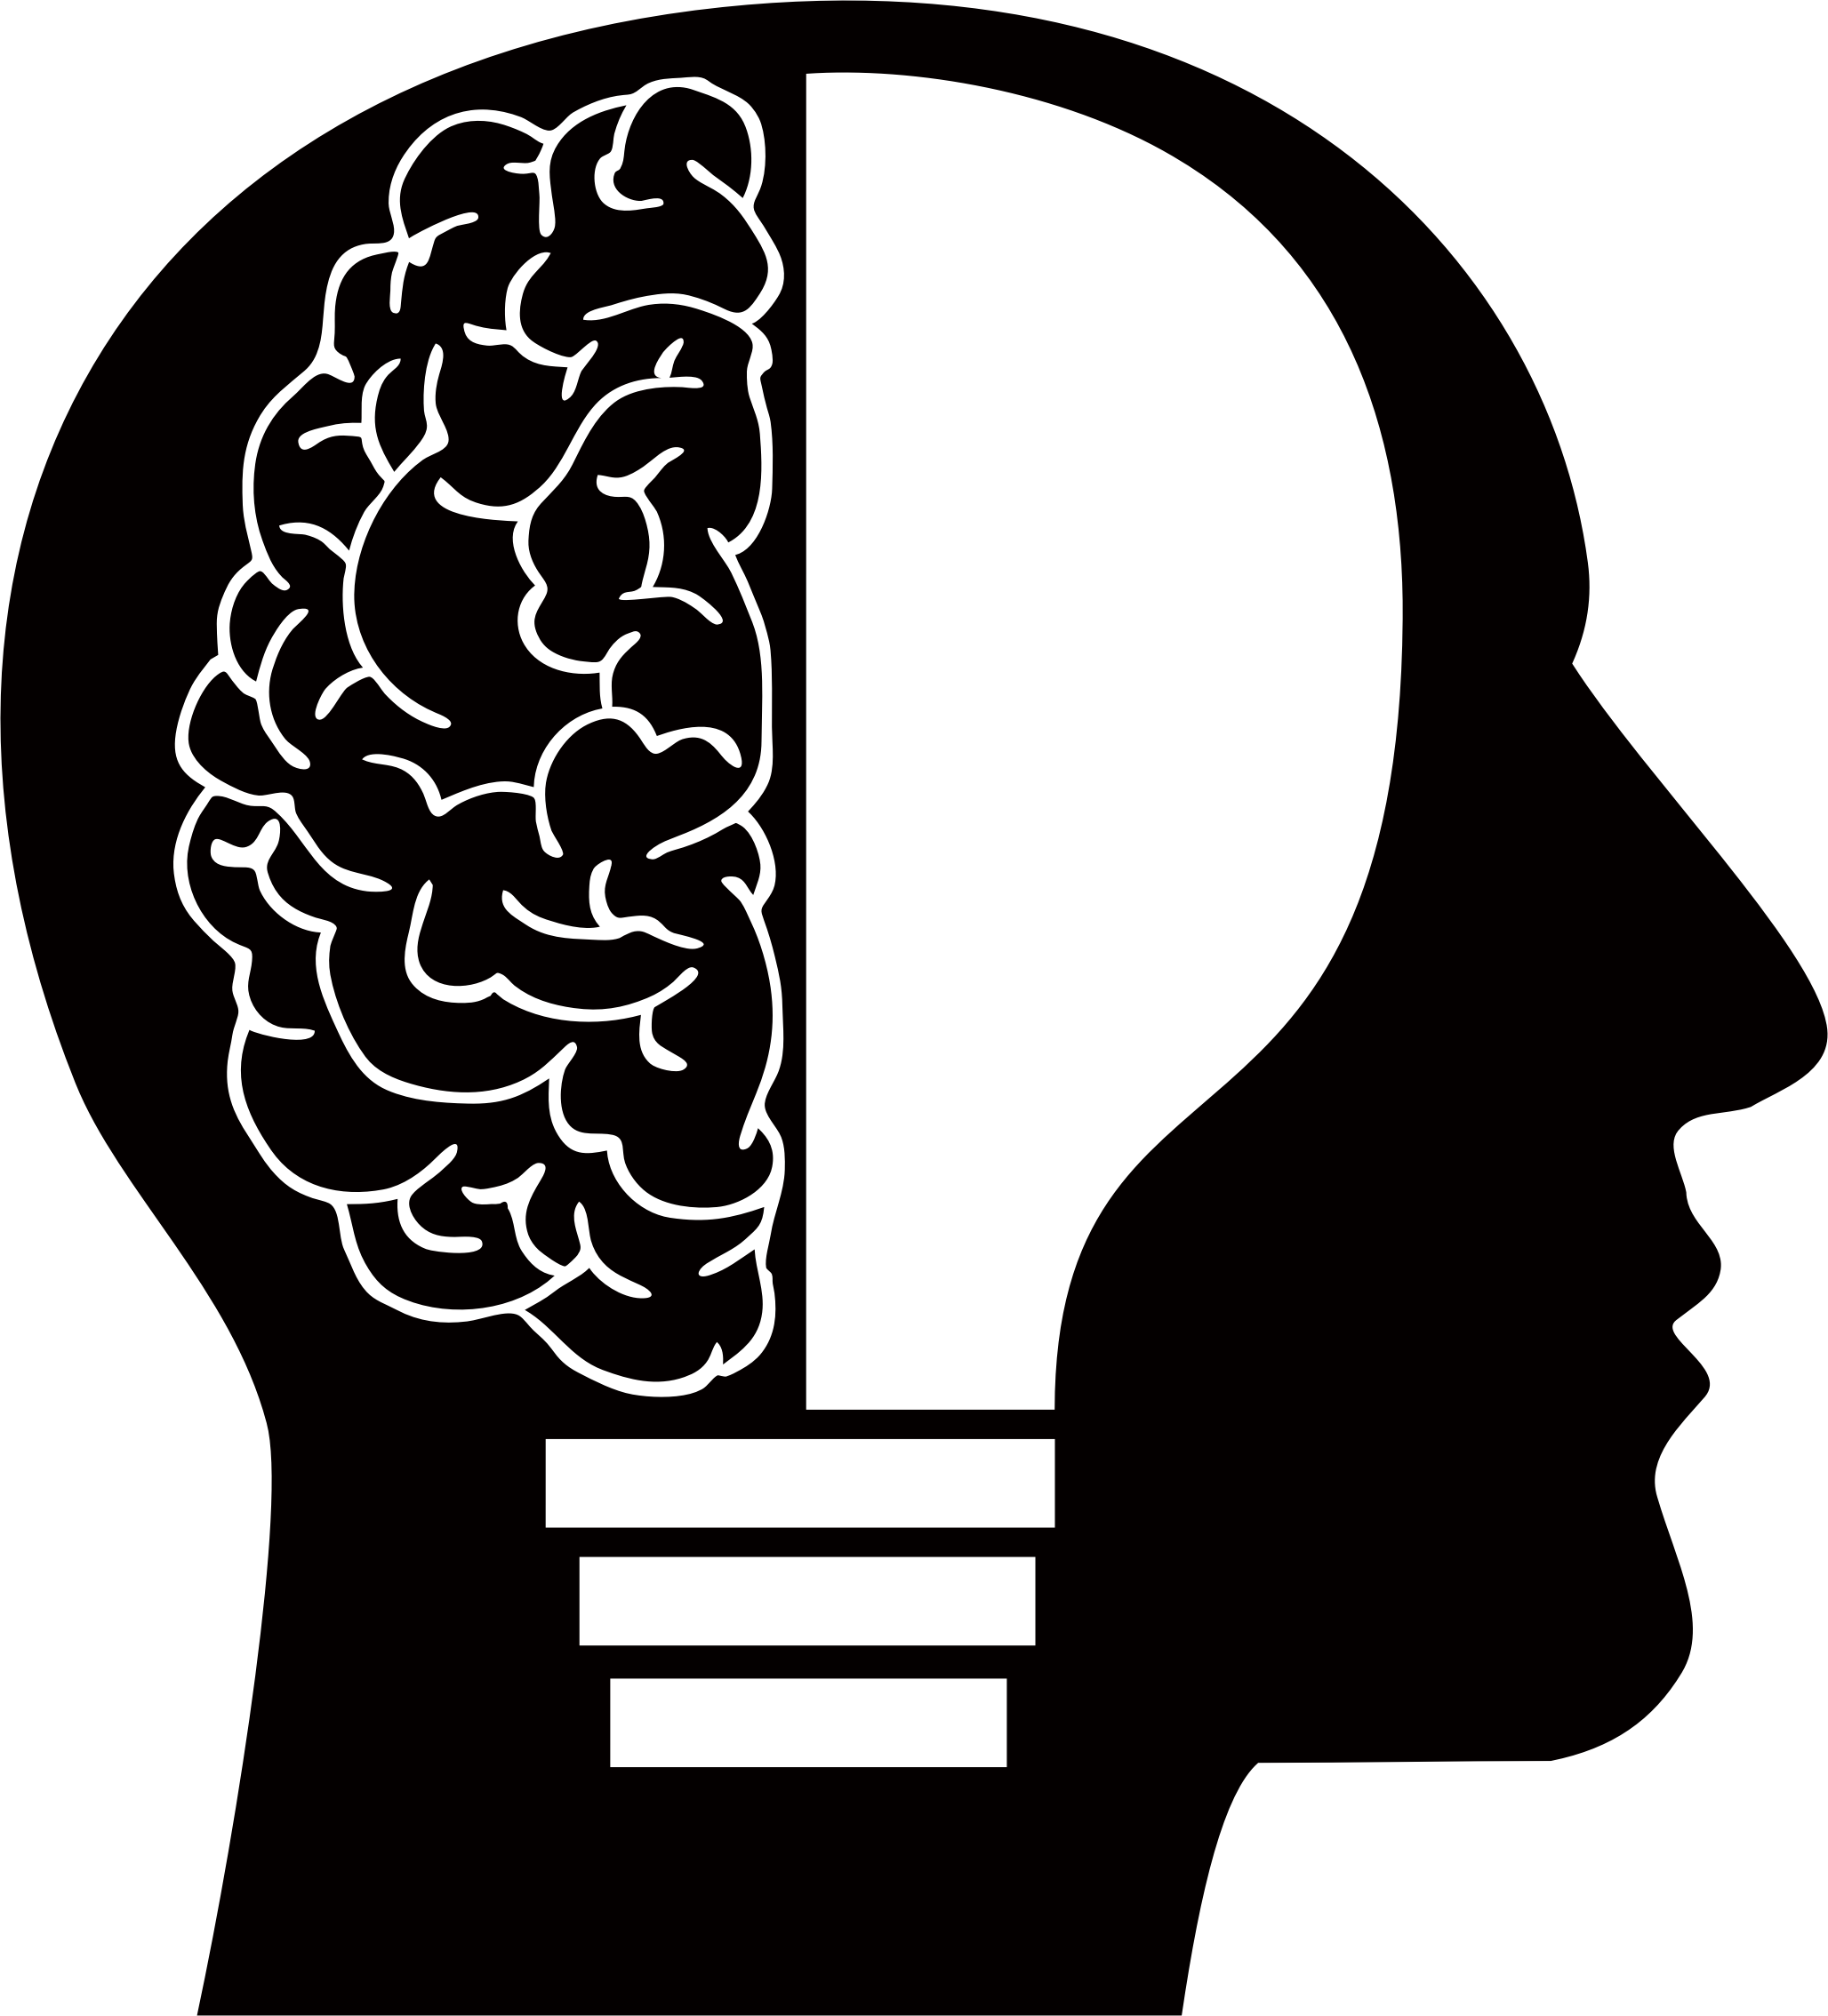 A Black Silhouette Of A Head With A Light Bulb In The Middle